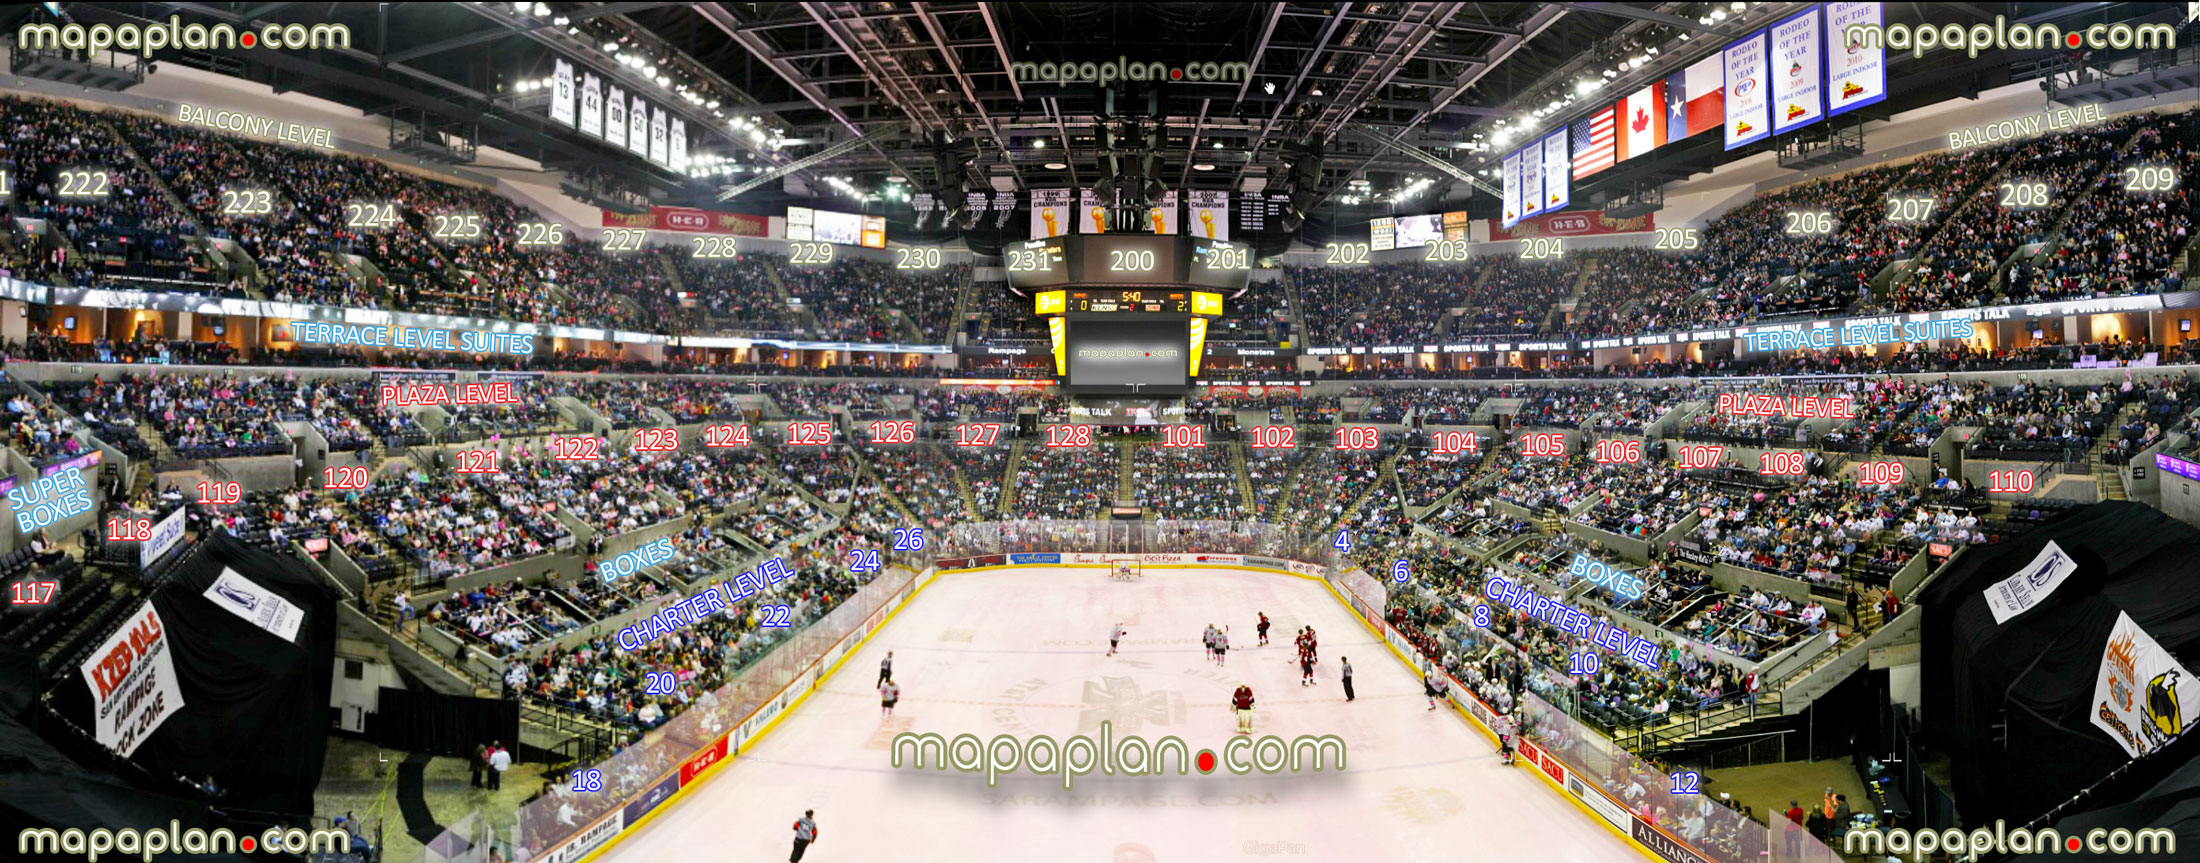 view section 114 row 34 seat 11 texas rampage ice hockey virtual interactive viewer review view my seat photo guide San Antonio Frost Bank Center seating chart